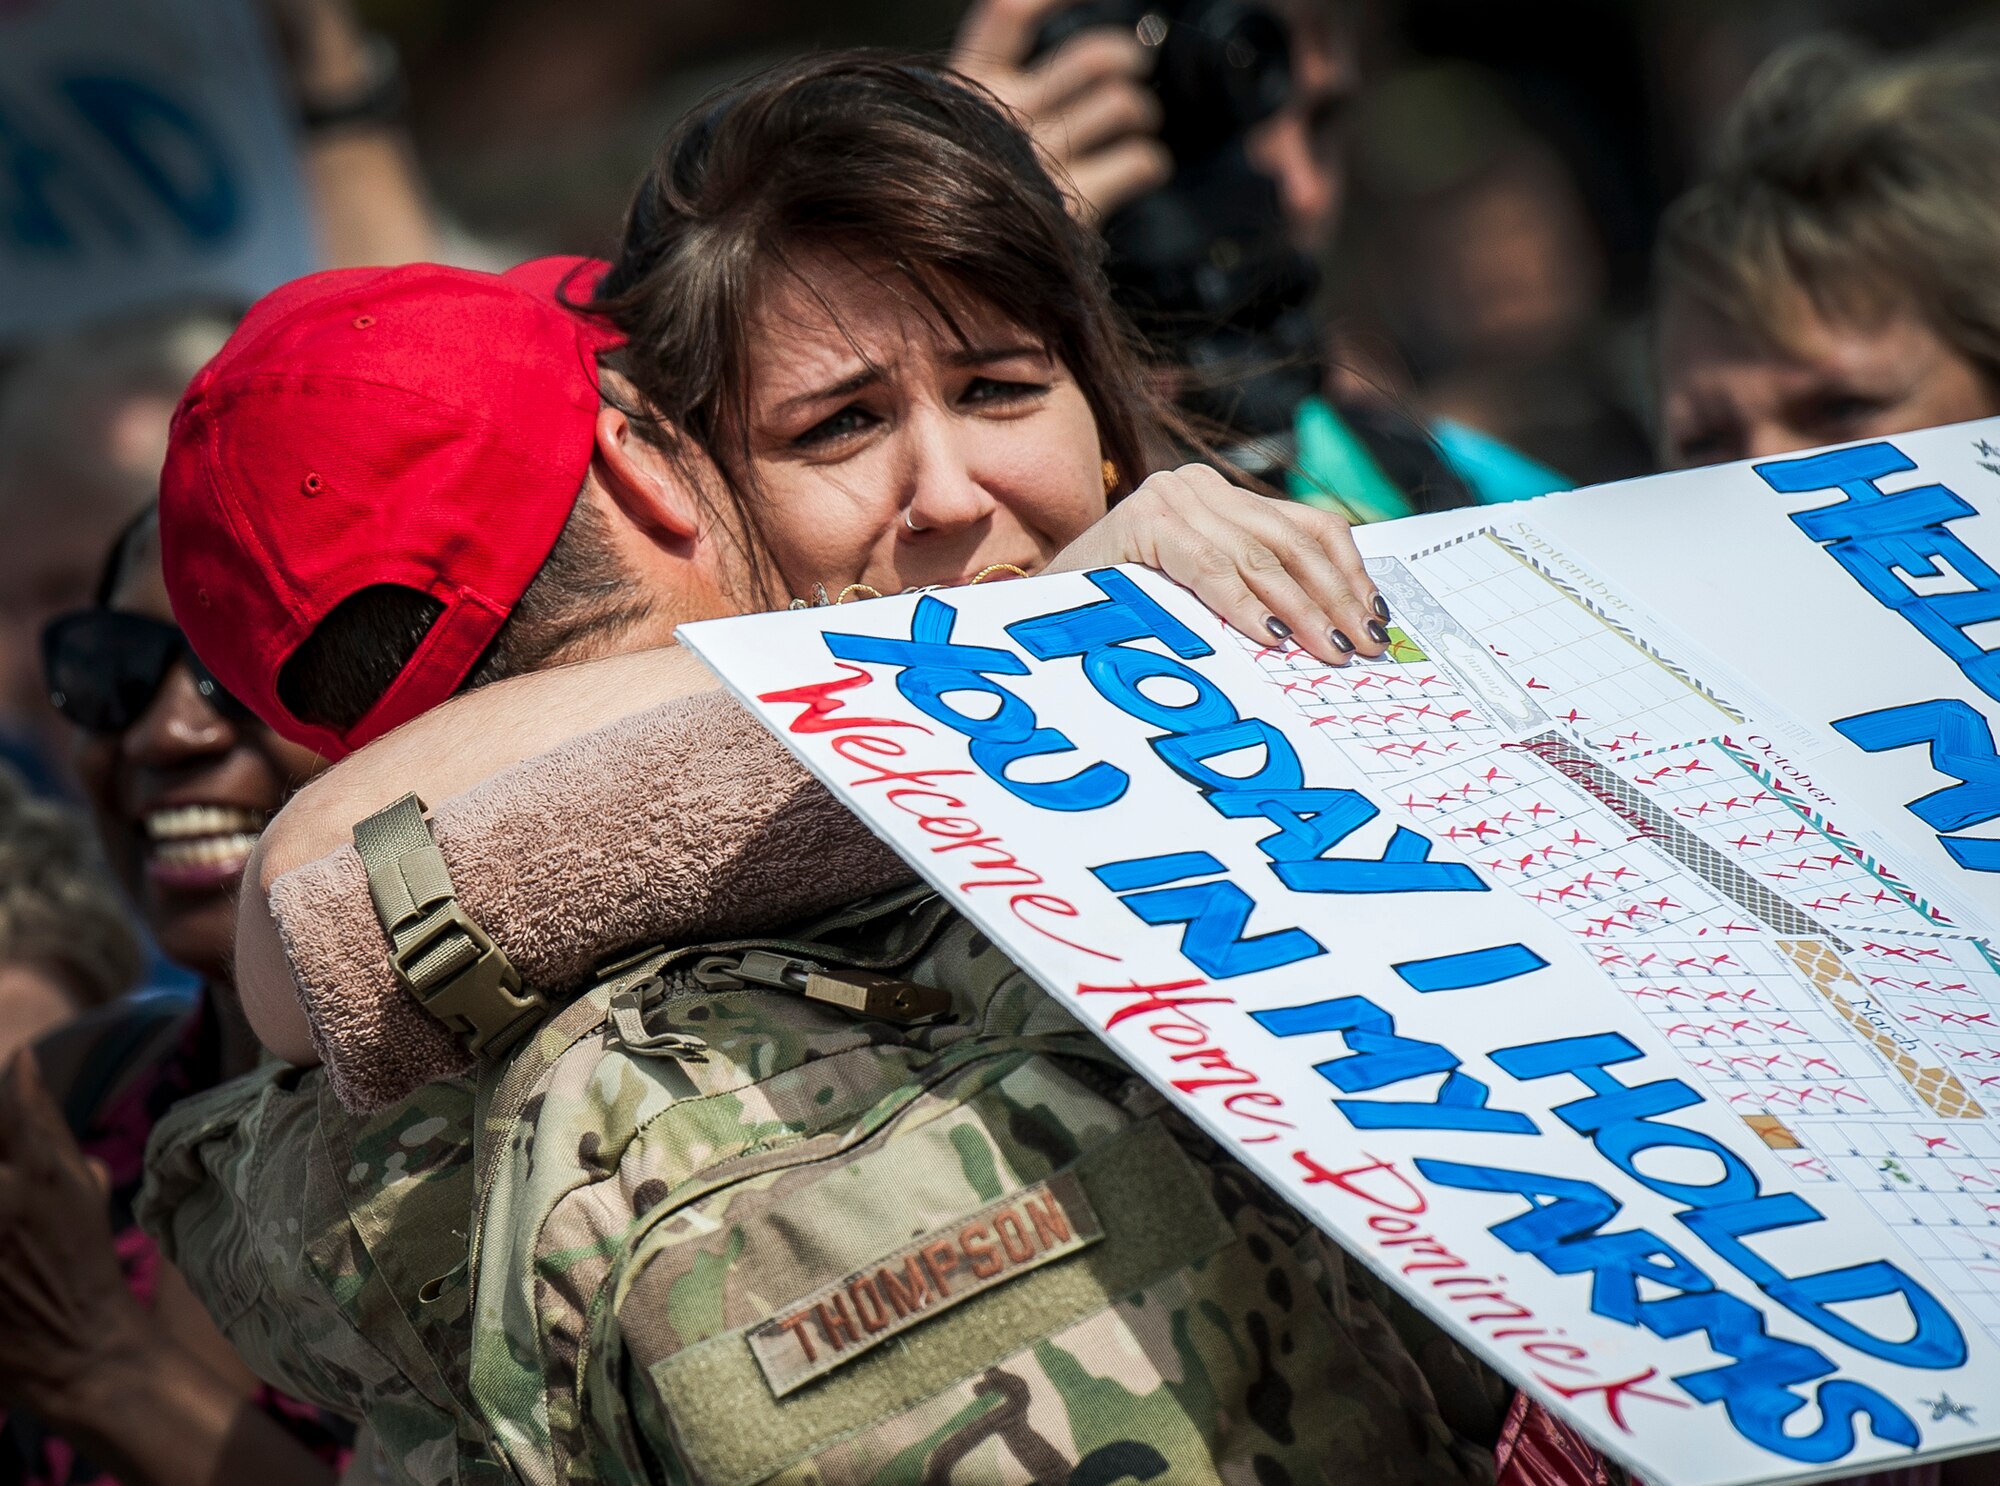 Senior Airman Dominick Thompson, 560th Red Horse Squadron, hugs his wife after returning from the unit’s first six month deployment April, 11, 2013, at Joint Base Charleston, S.C.The Air Force Reservists have been deployed as part of the the 557th Expeditionary RED HORSE Squadron since November and were responsible for heavy construction projects at various Middle Eastern locations.  (U.S. Air Force photo/ Senior Airman Dennis Sloan)